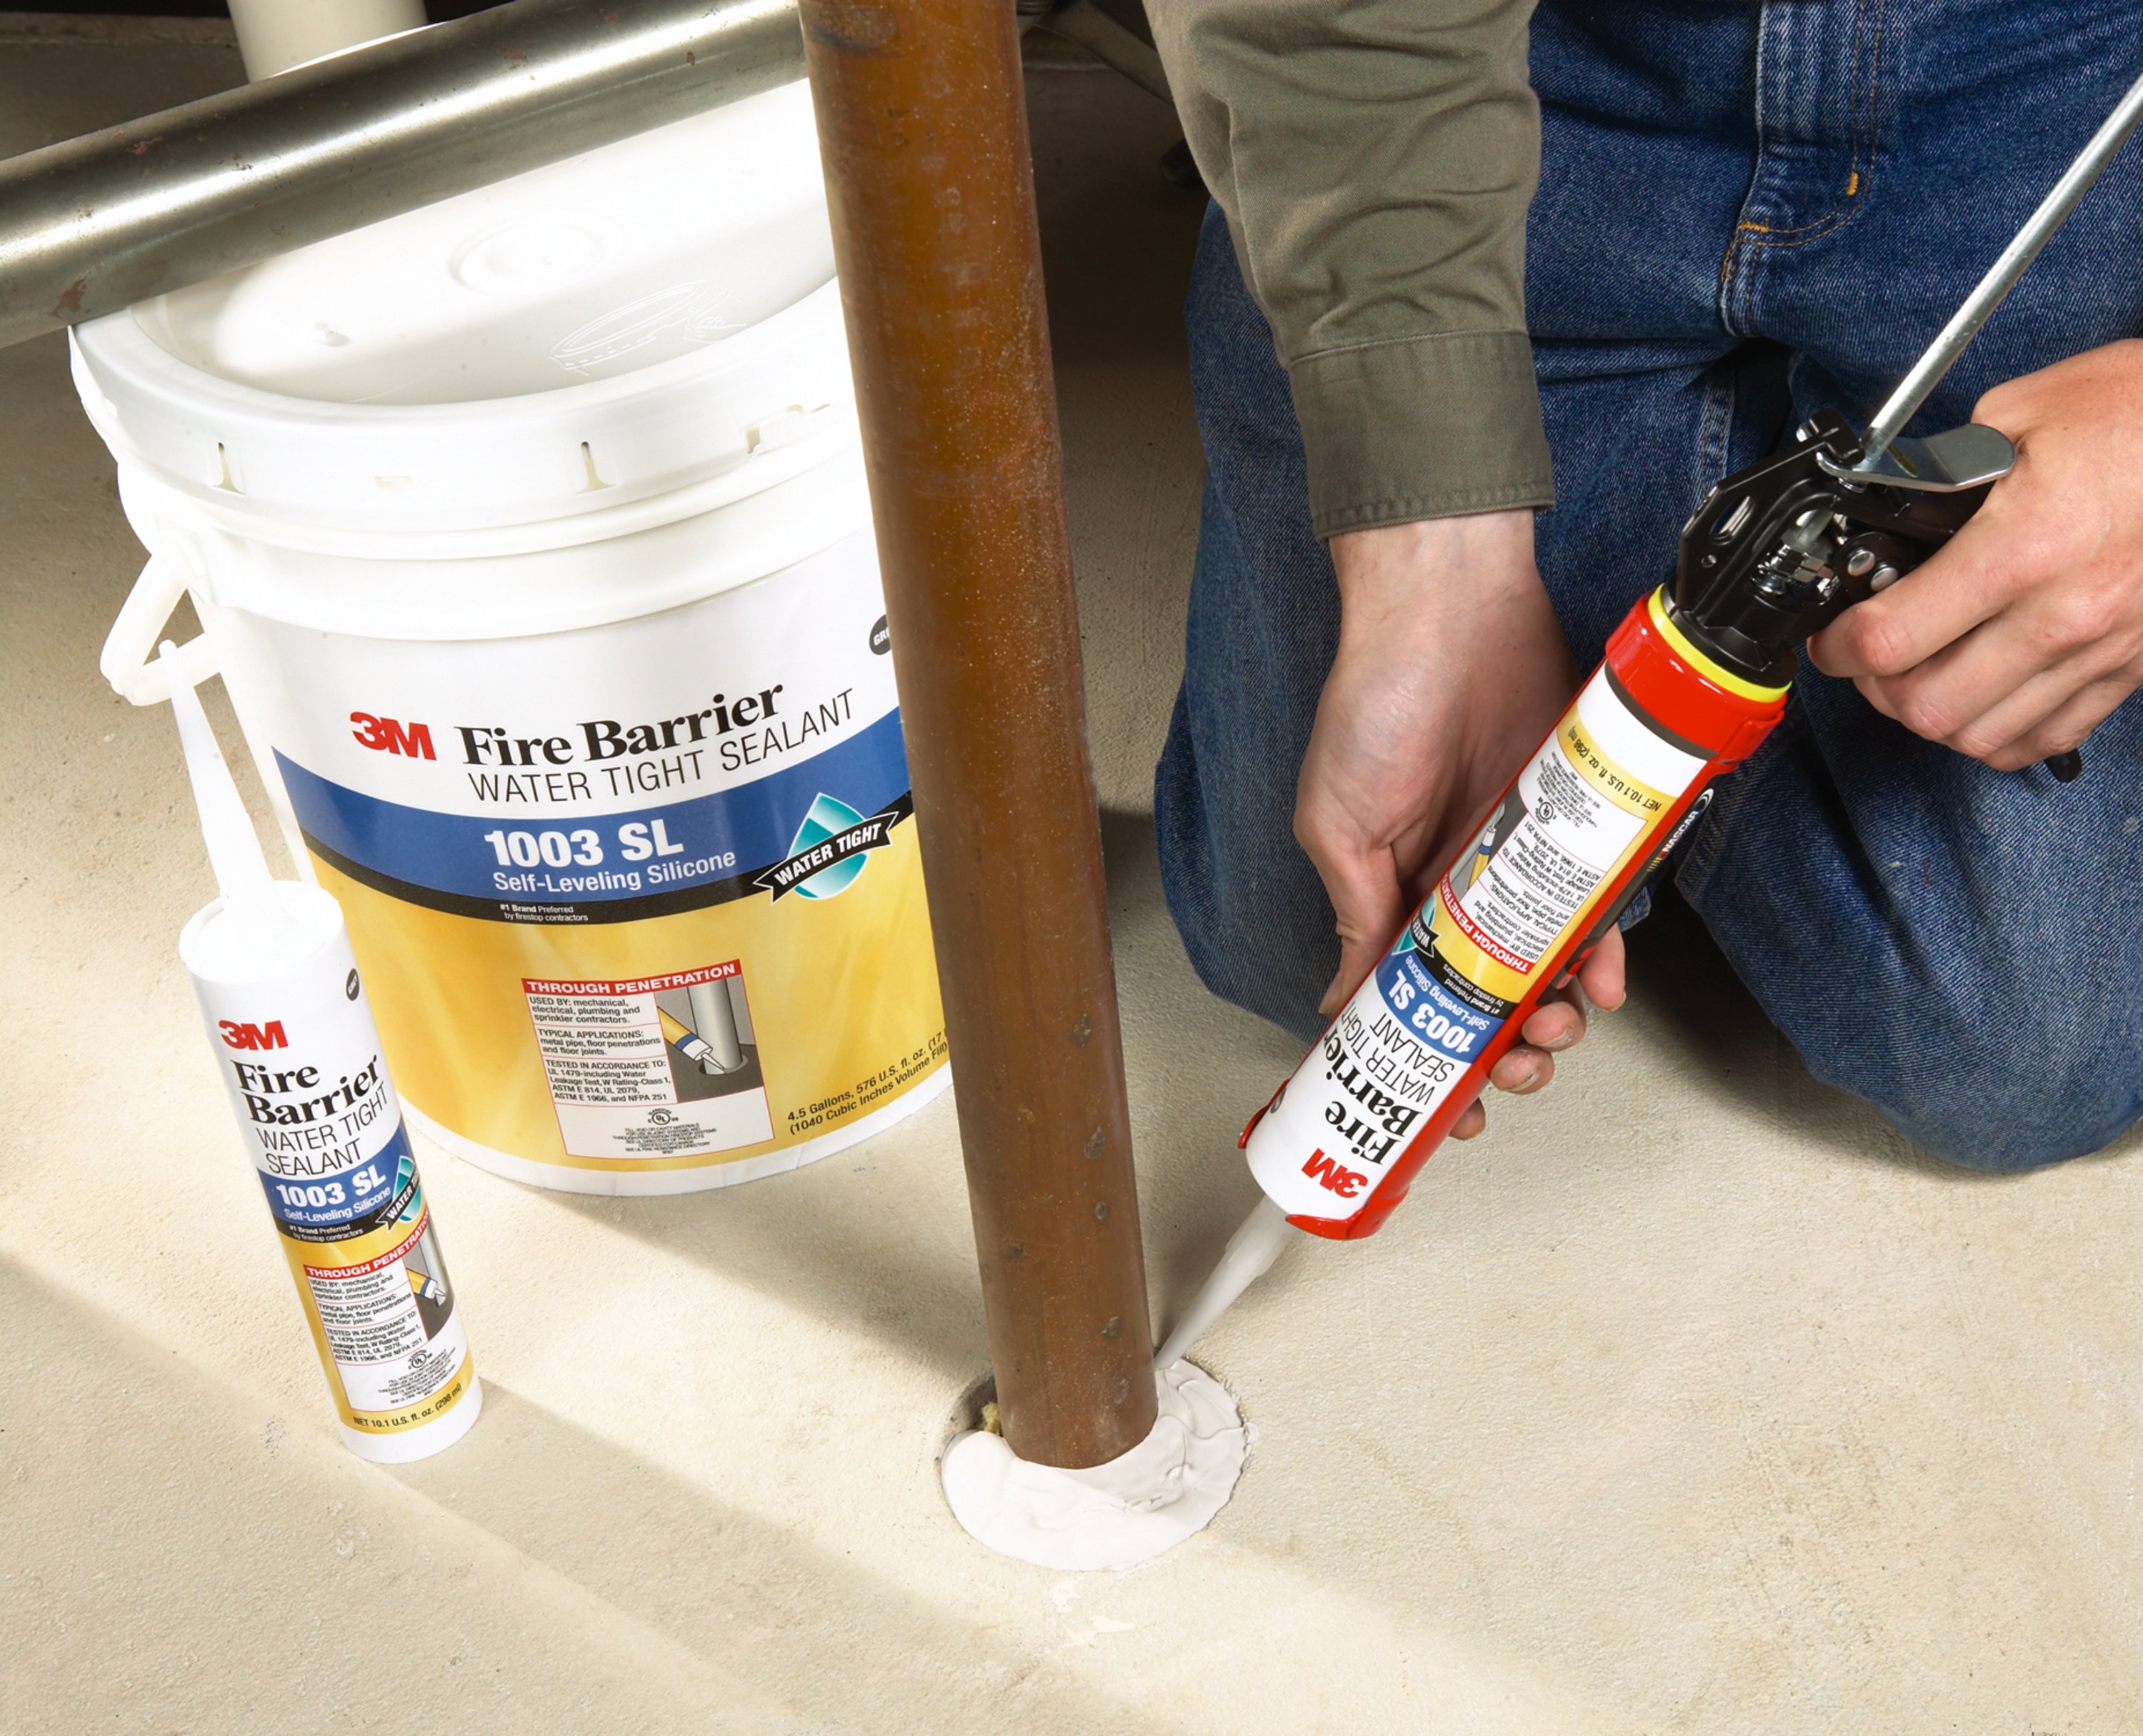 3M™ Fire Barrier Water Tight Sealant 1003 SL